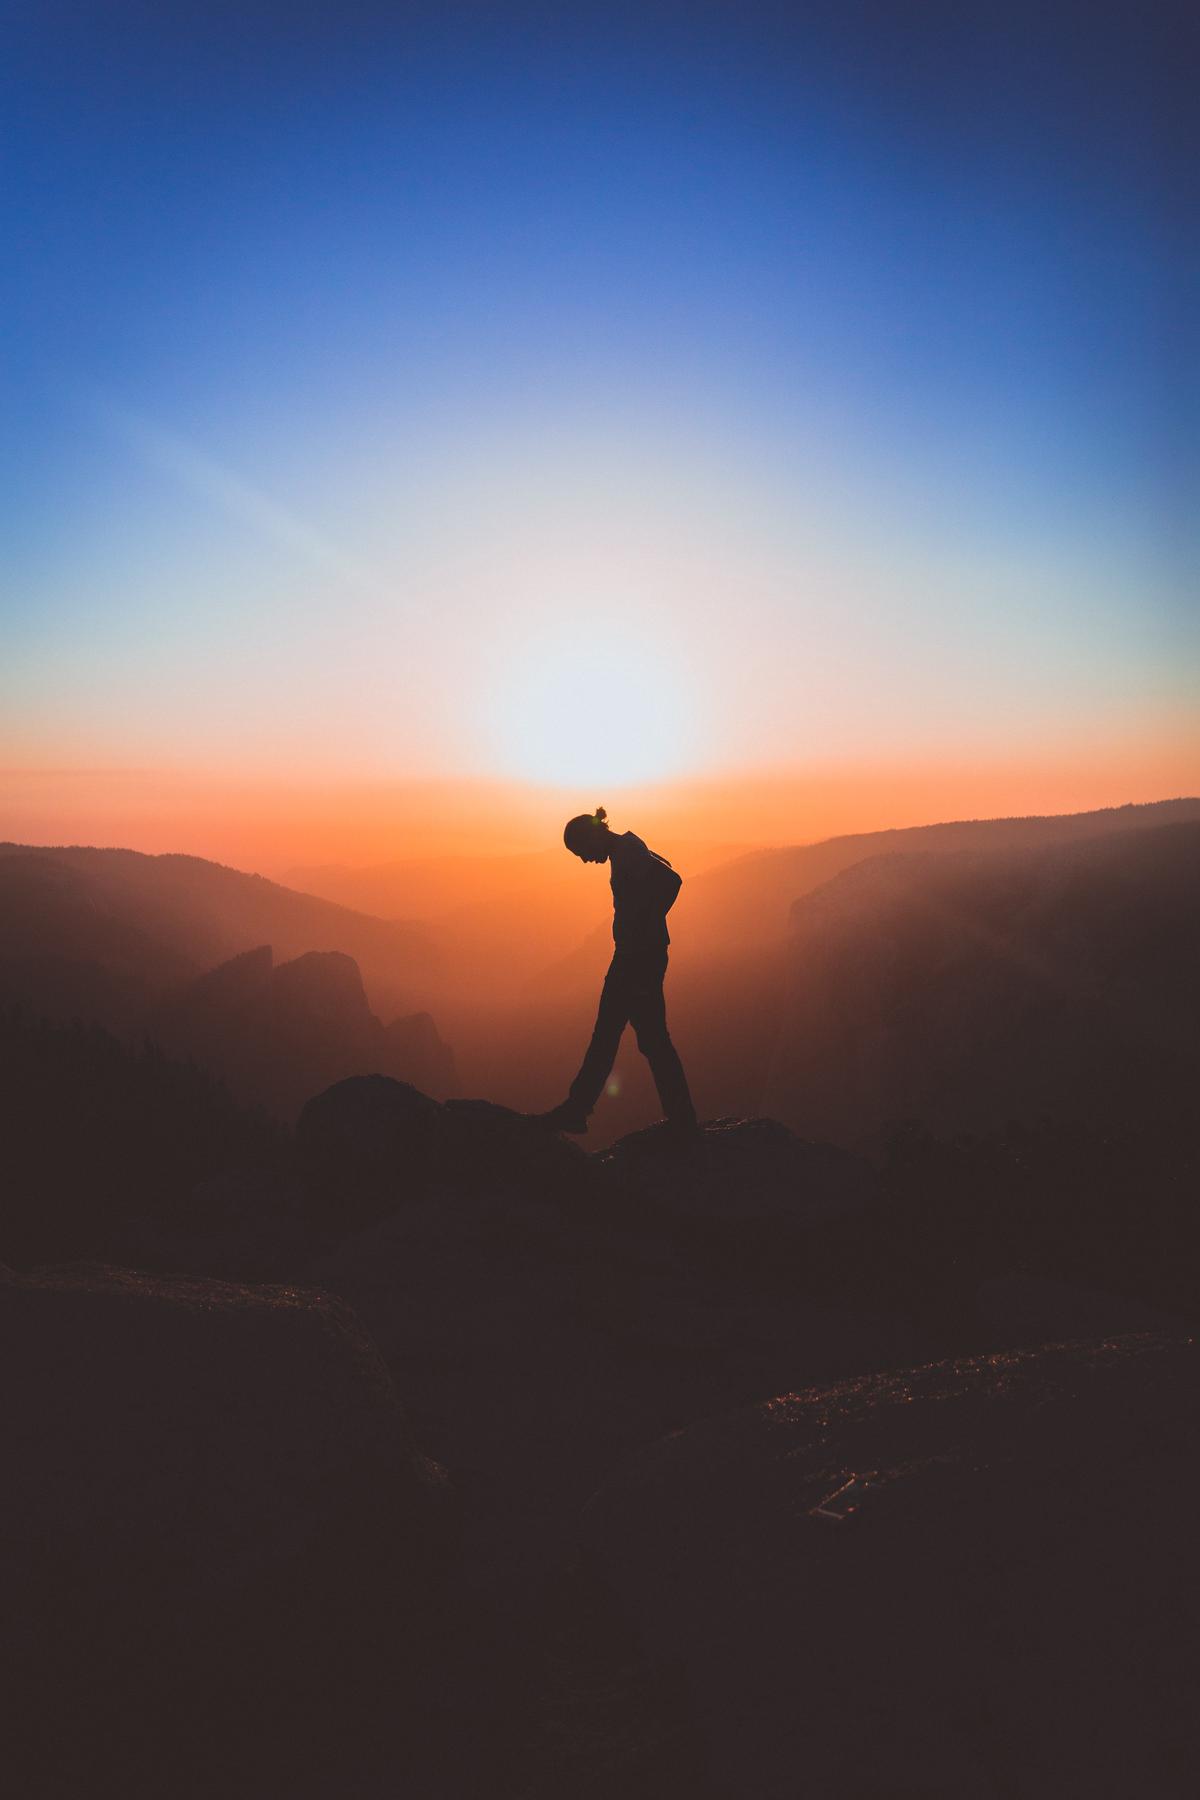 An image depicting a person standing on a mountain peak, symbolizing self-discovery and reaching one's potential.